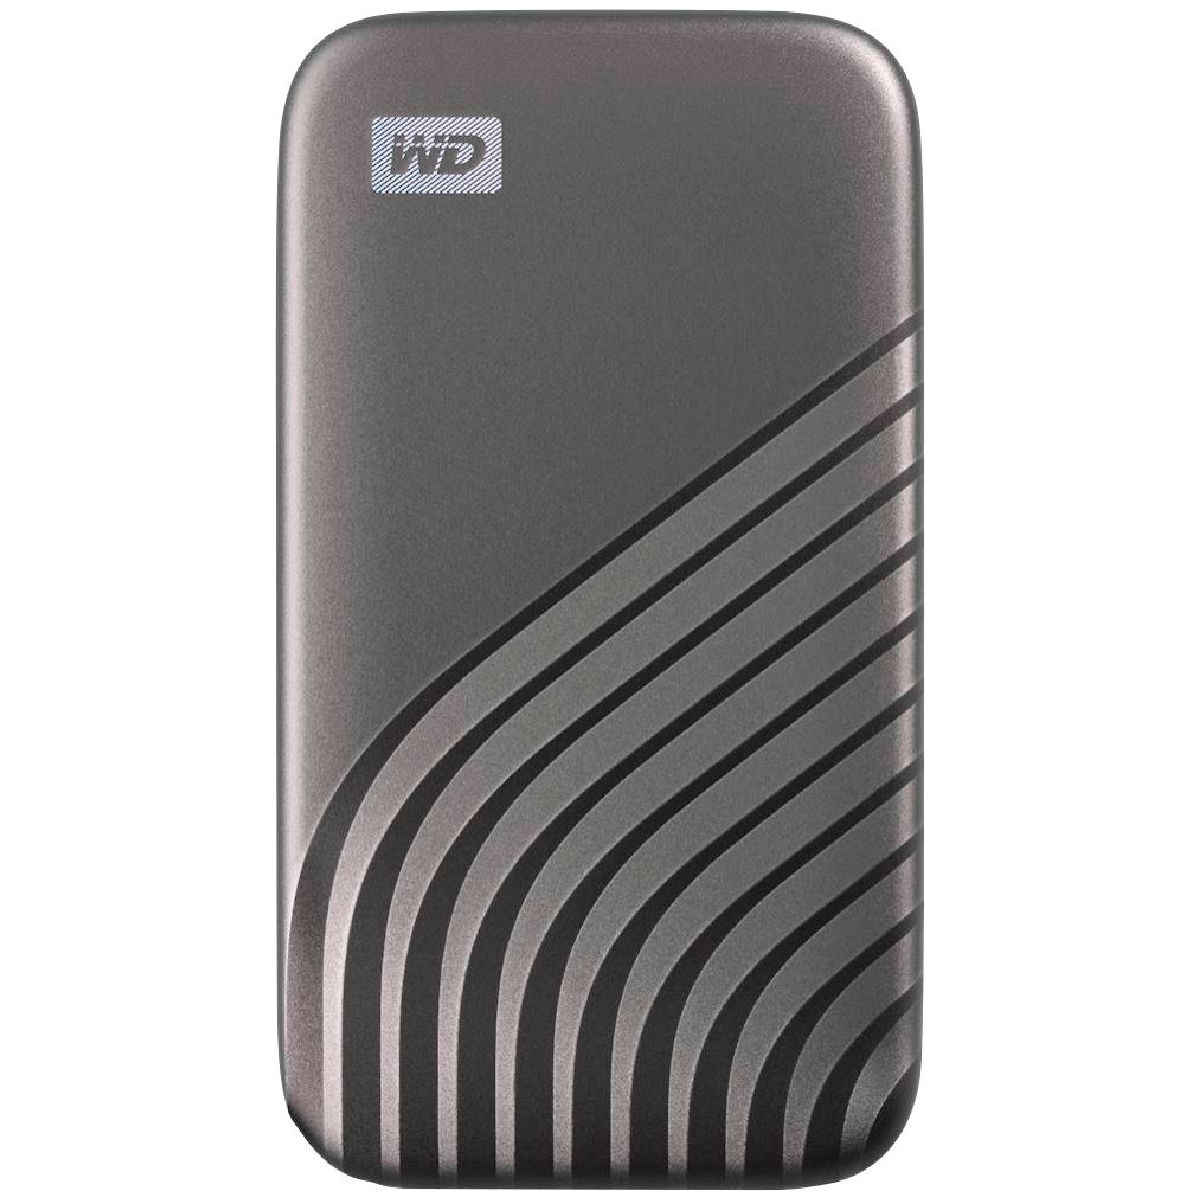 WD My Passport 500GB External USB Type-C Portable Solid State Drive WDBAGF5000AGY-WESN